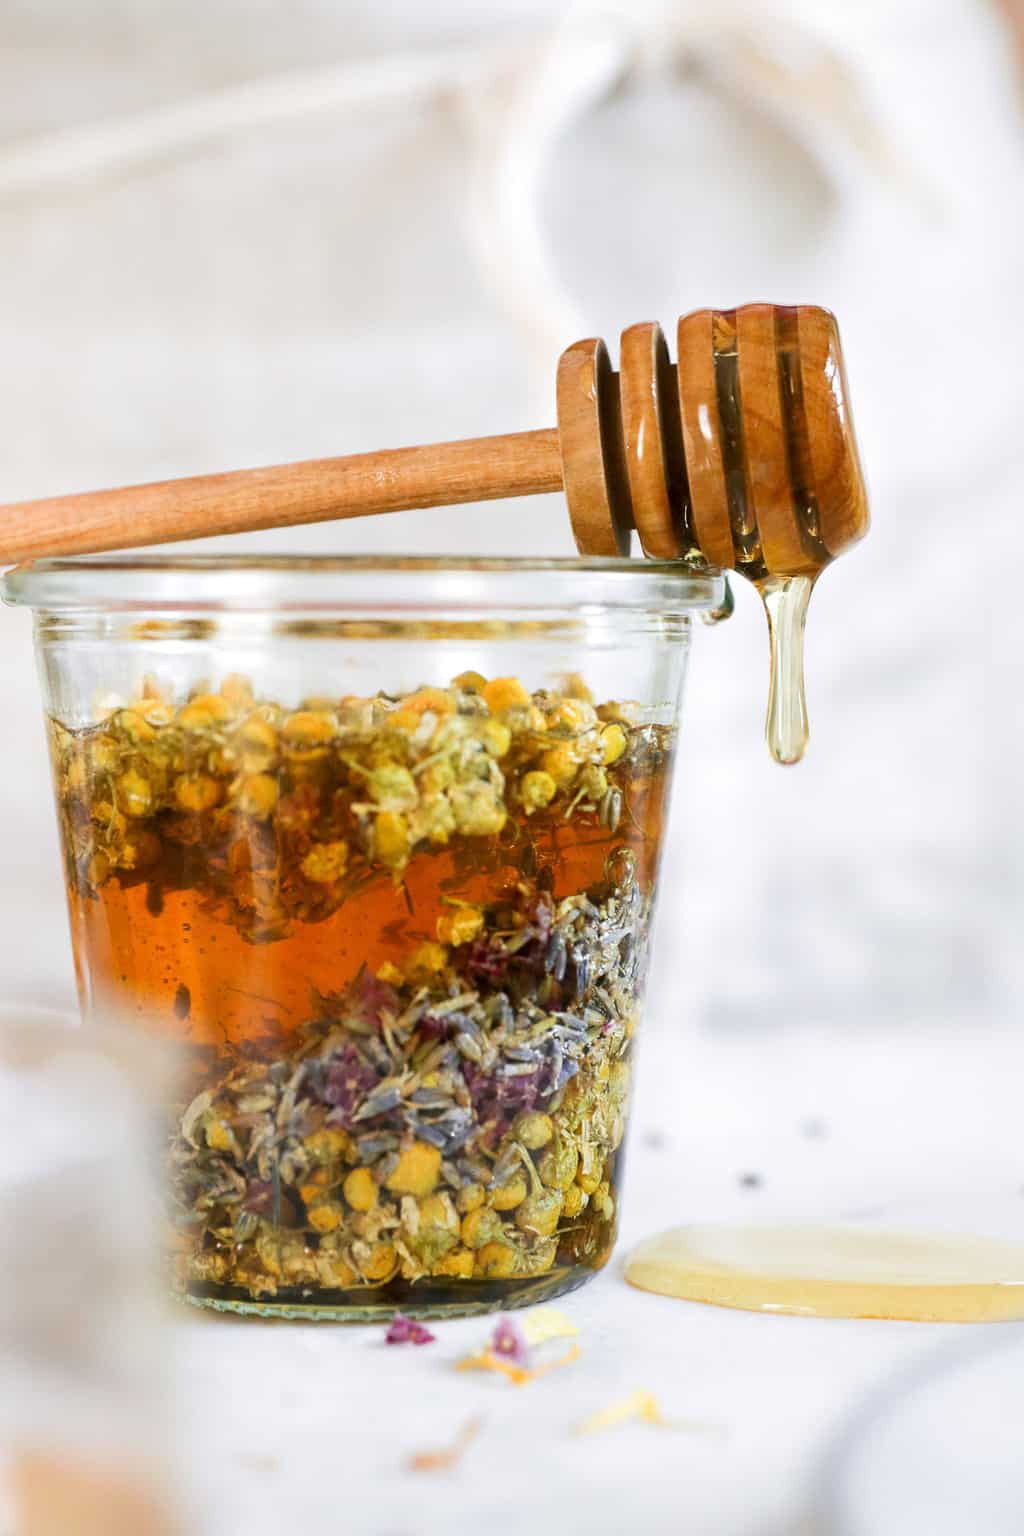 How to make herb and flower infused honey